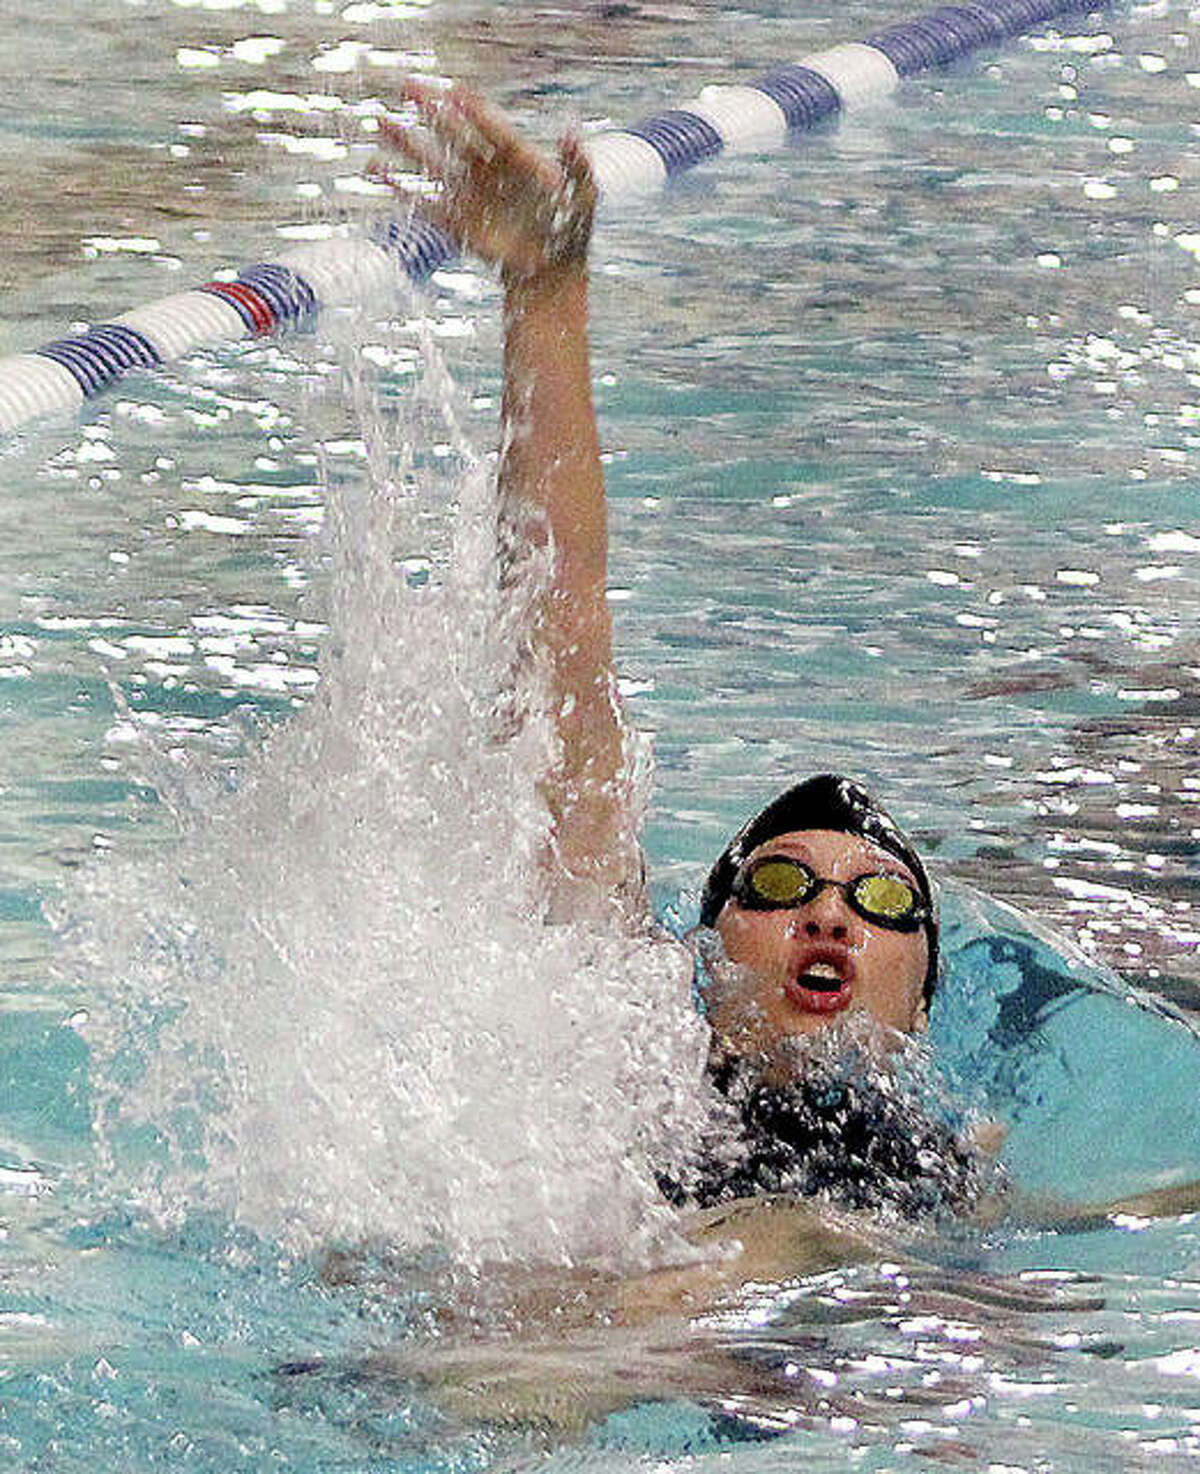 Edwardsville senior Phoebe Gremaud, won the 200-yard individual medley (2:18.10) and the 100-yard backstroke (1:02.40) Tuesday in her team’s win over Champaign Central at the Chuck Fruit Aquatic Center.